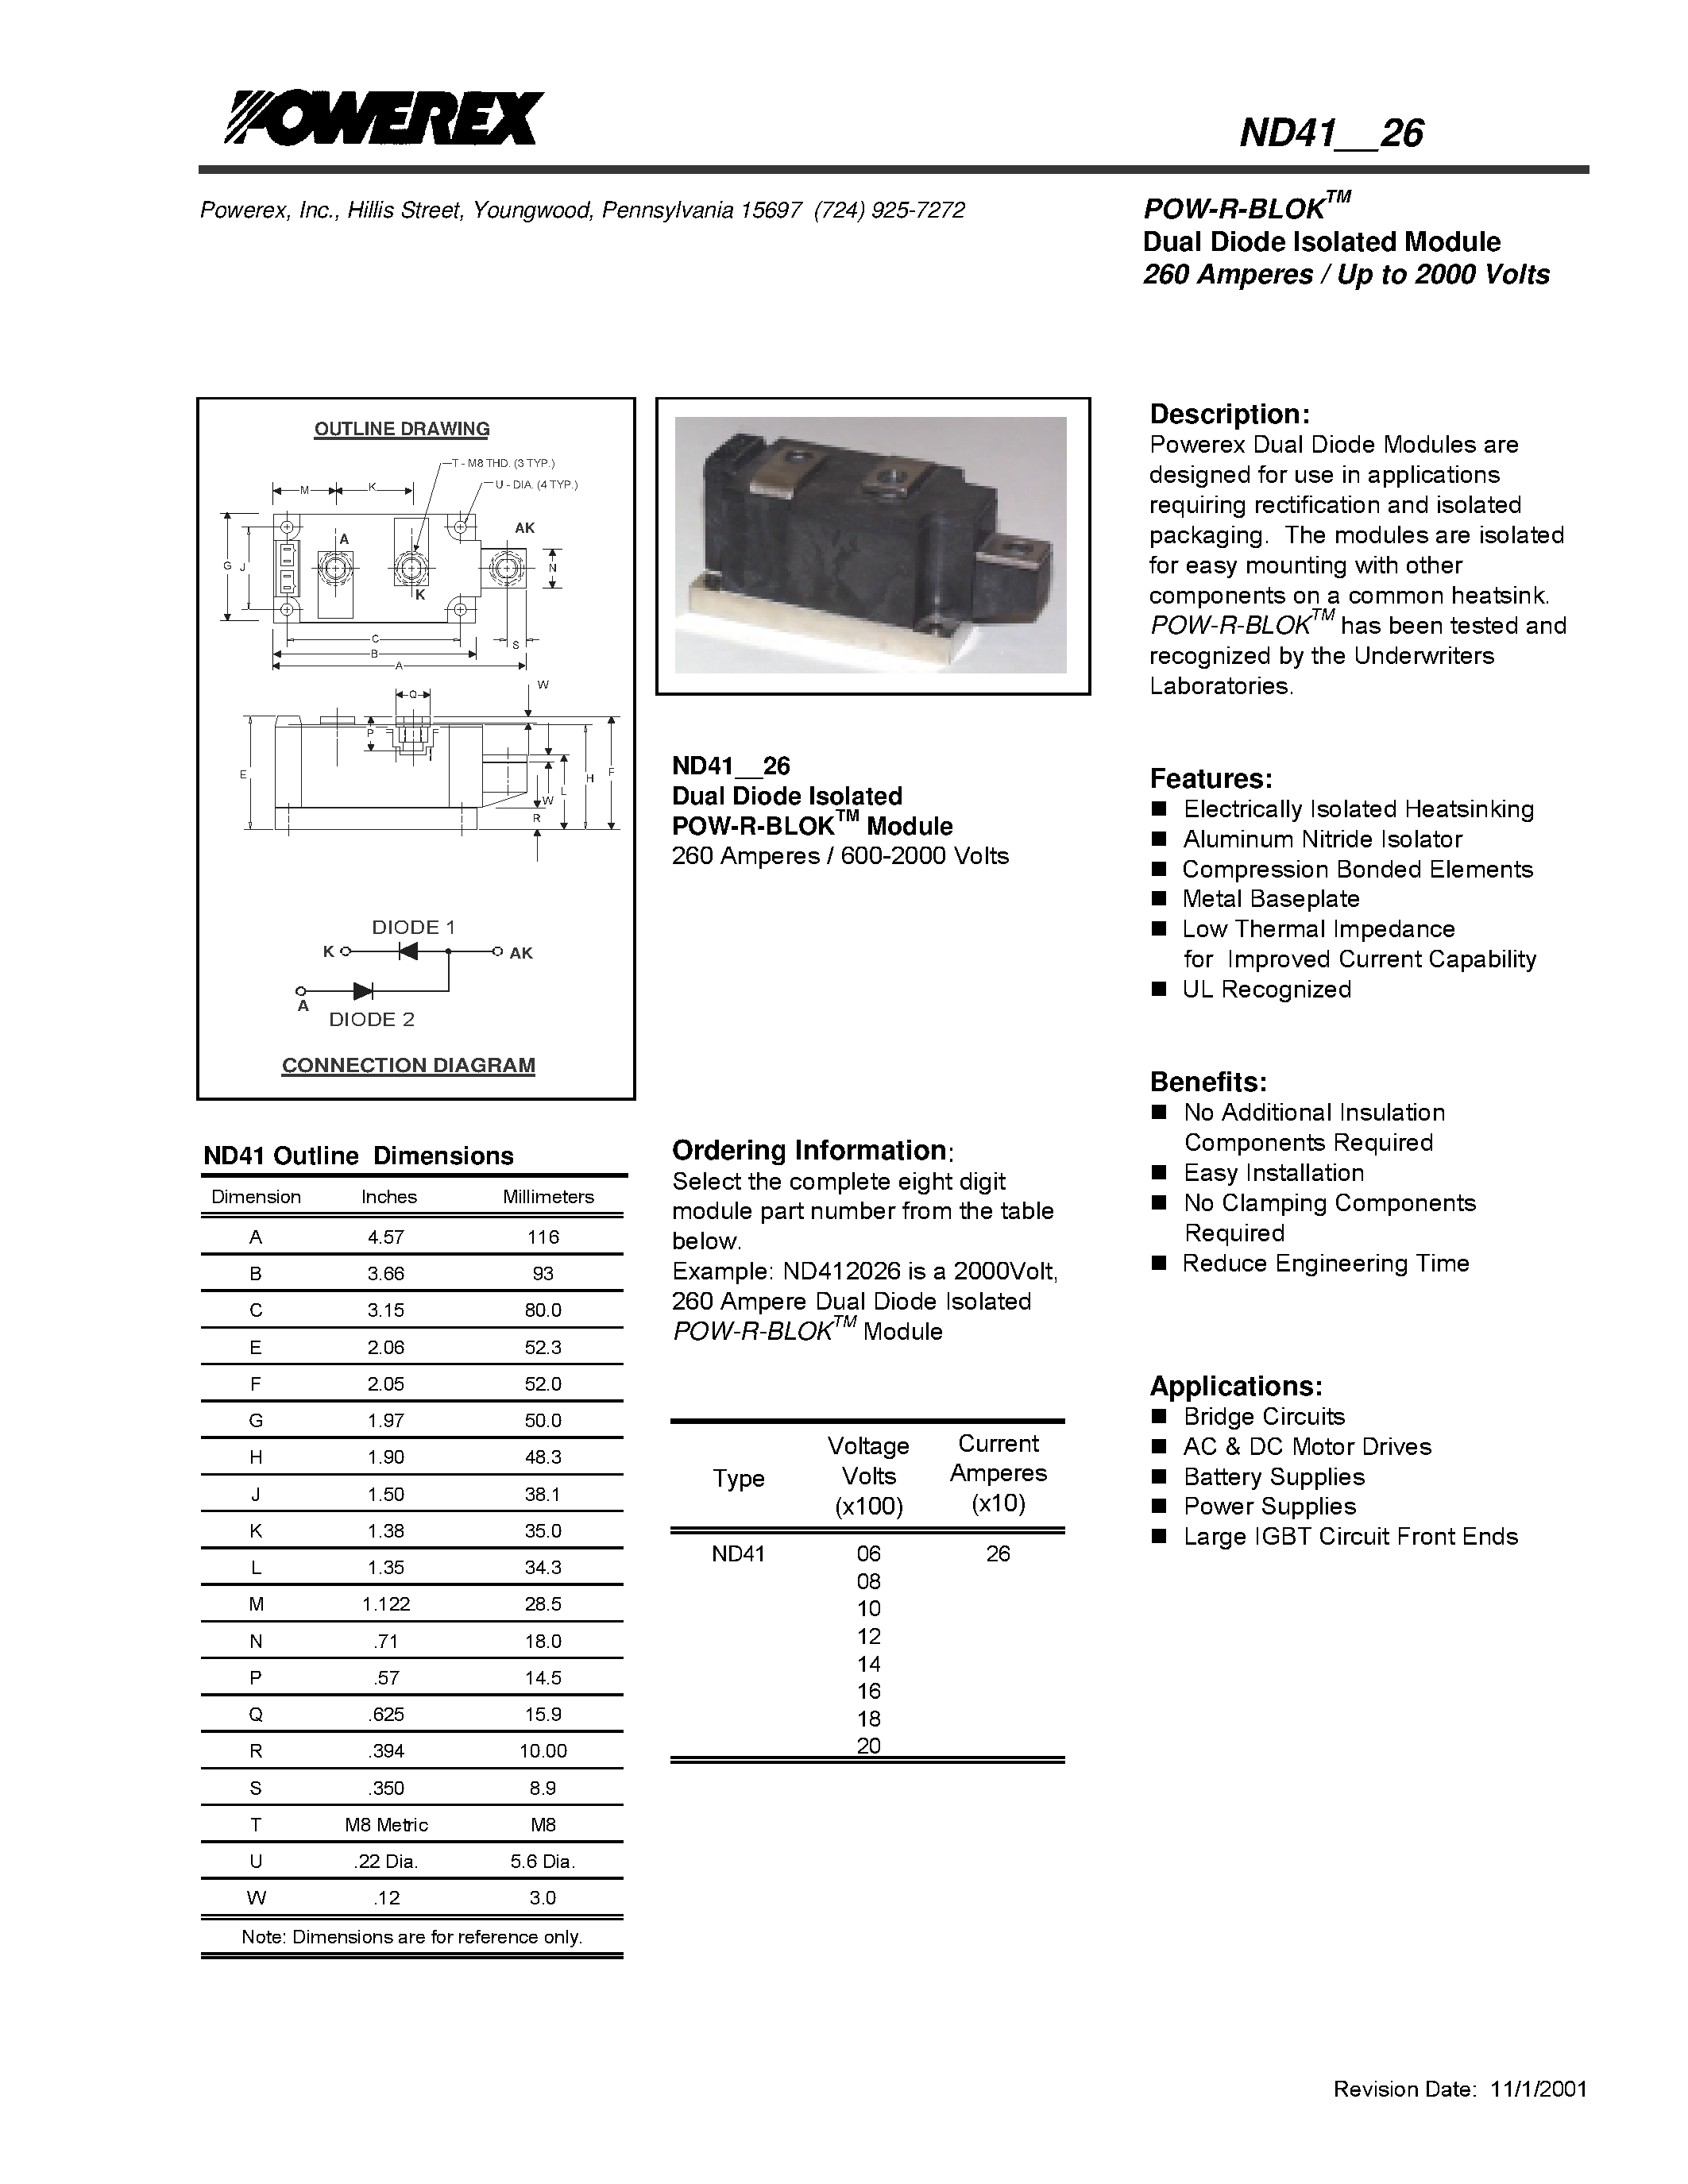 Datasheet ND411626 - POW-R-BLOK Dual Diode Isolated Module (260 Amperes / Up to 2000 Volts) page 1